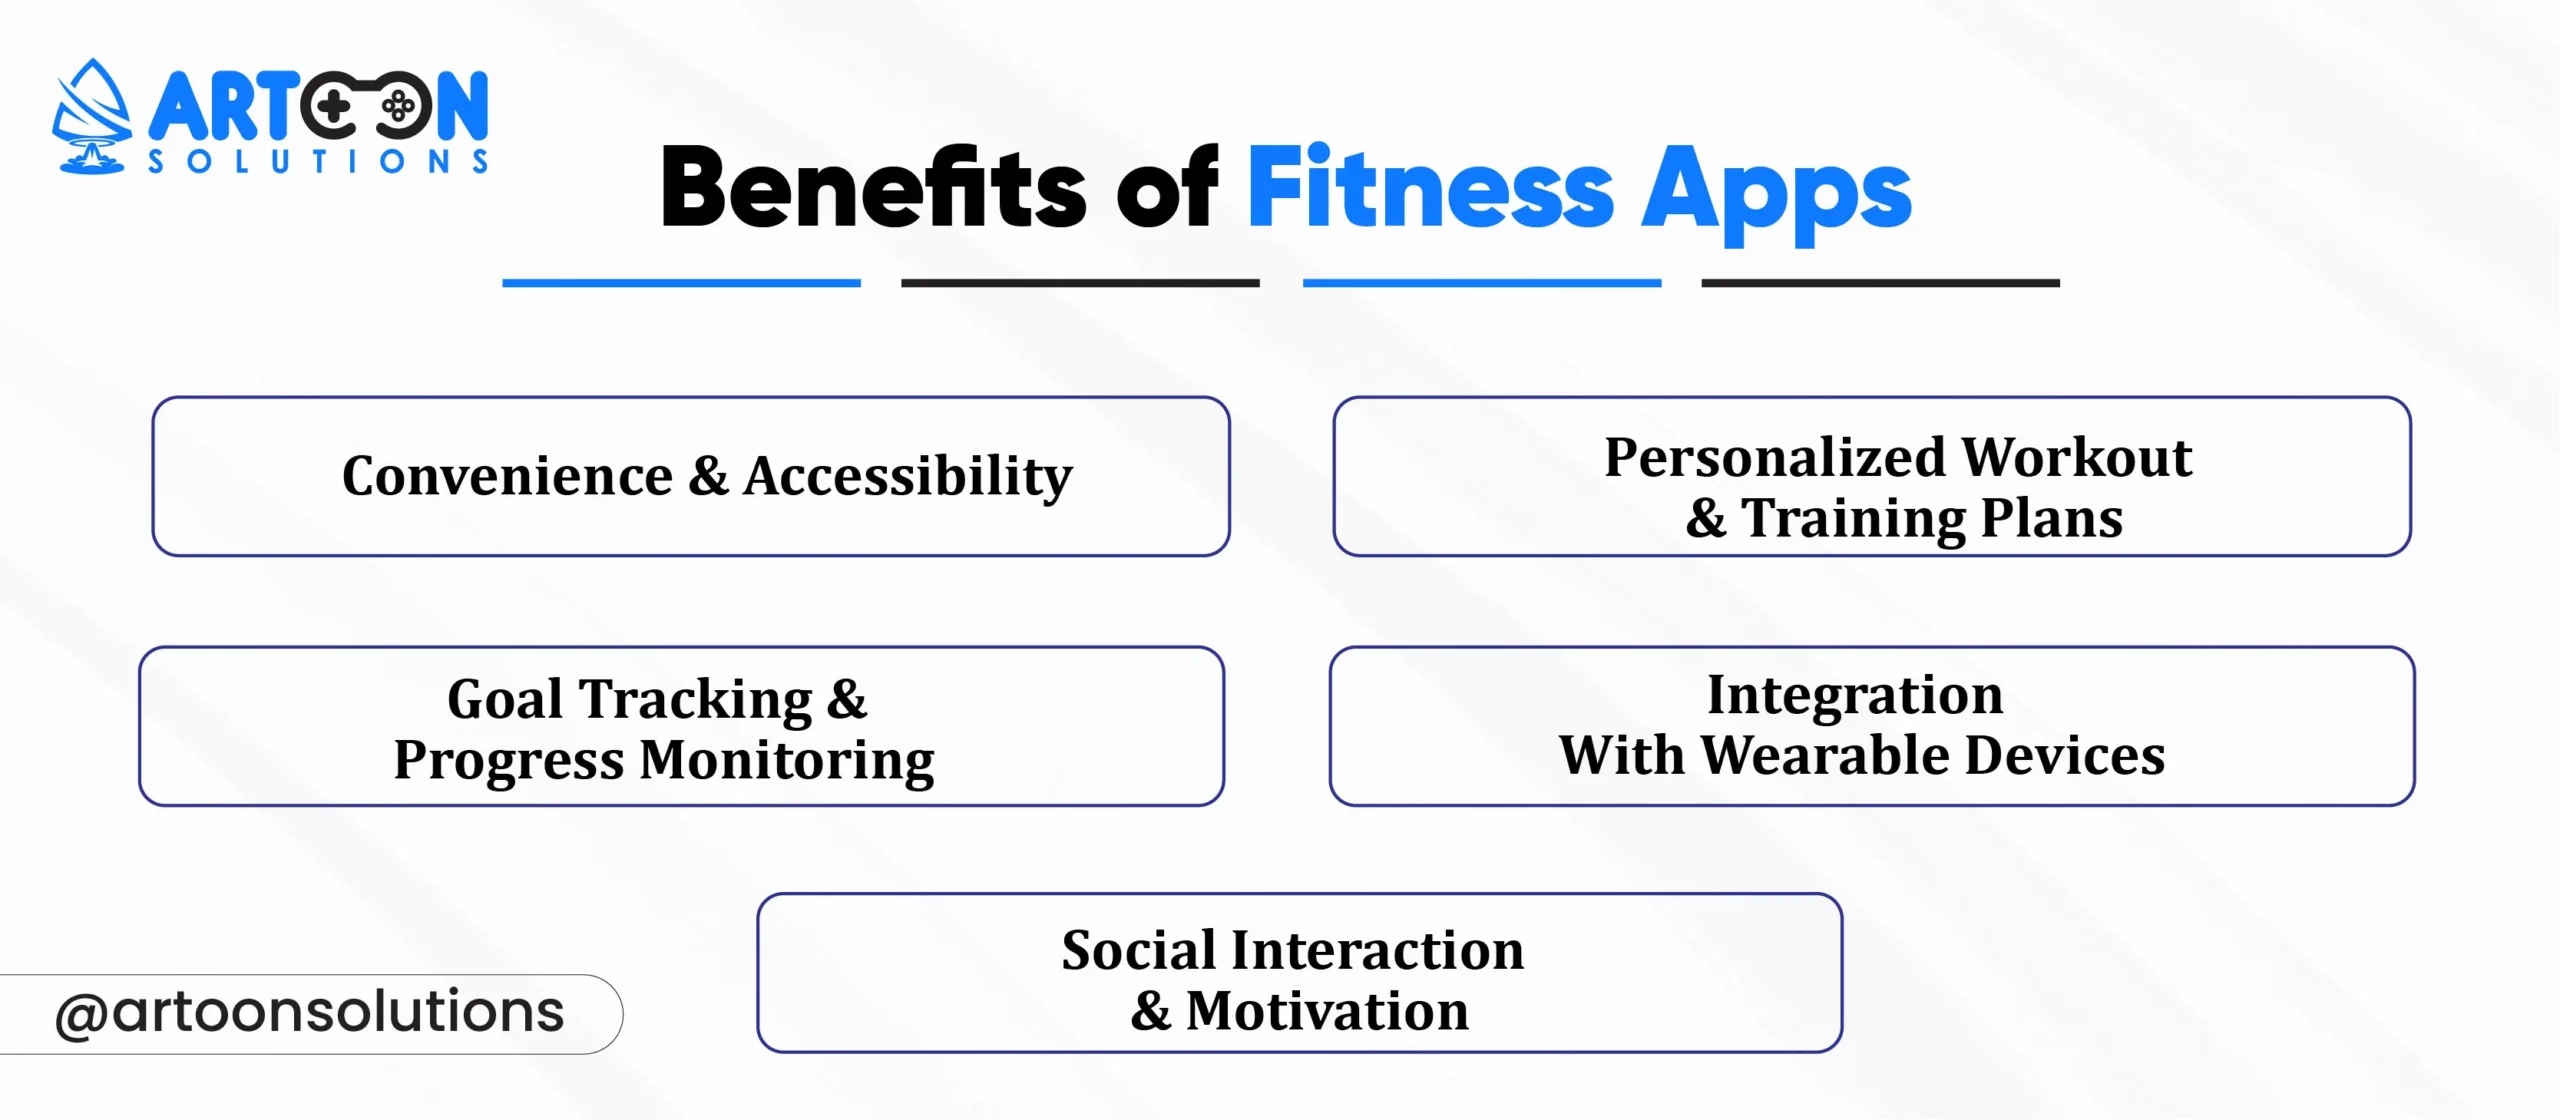 Benefits of Fitness Apps